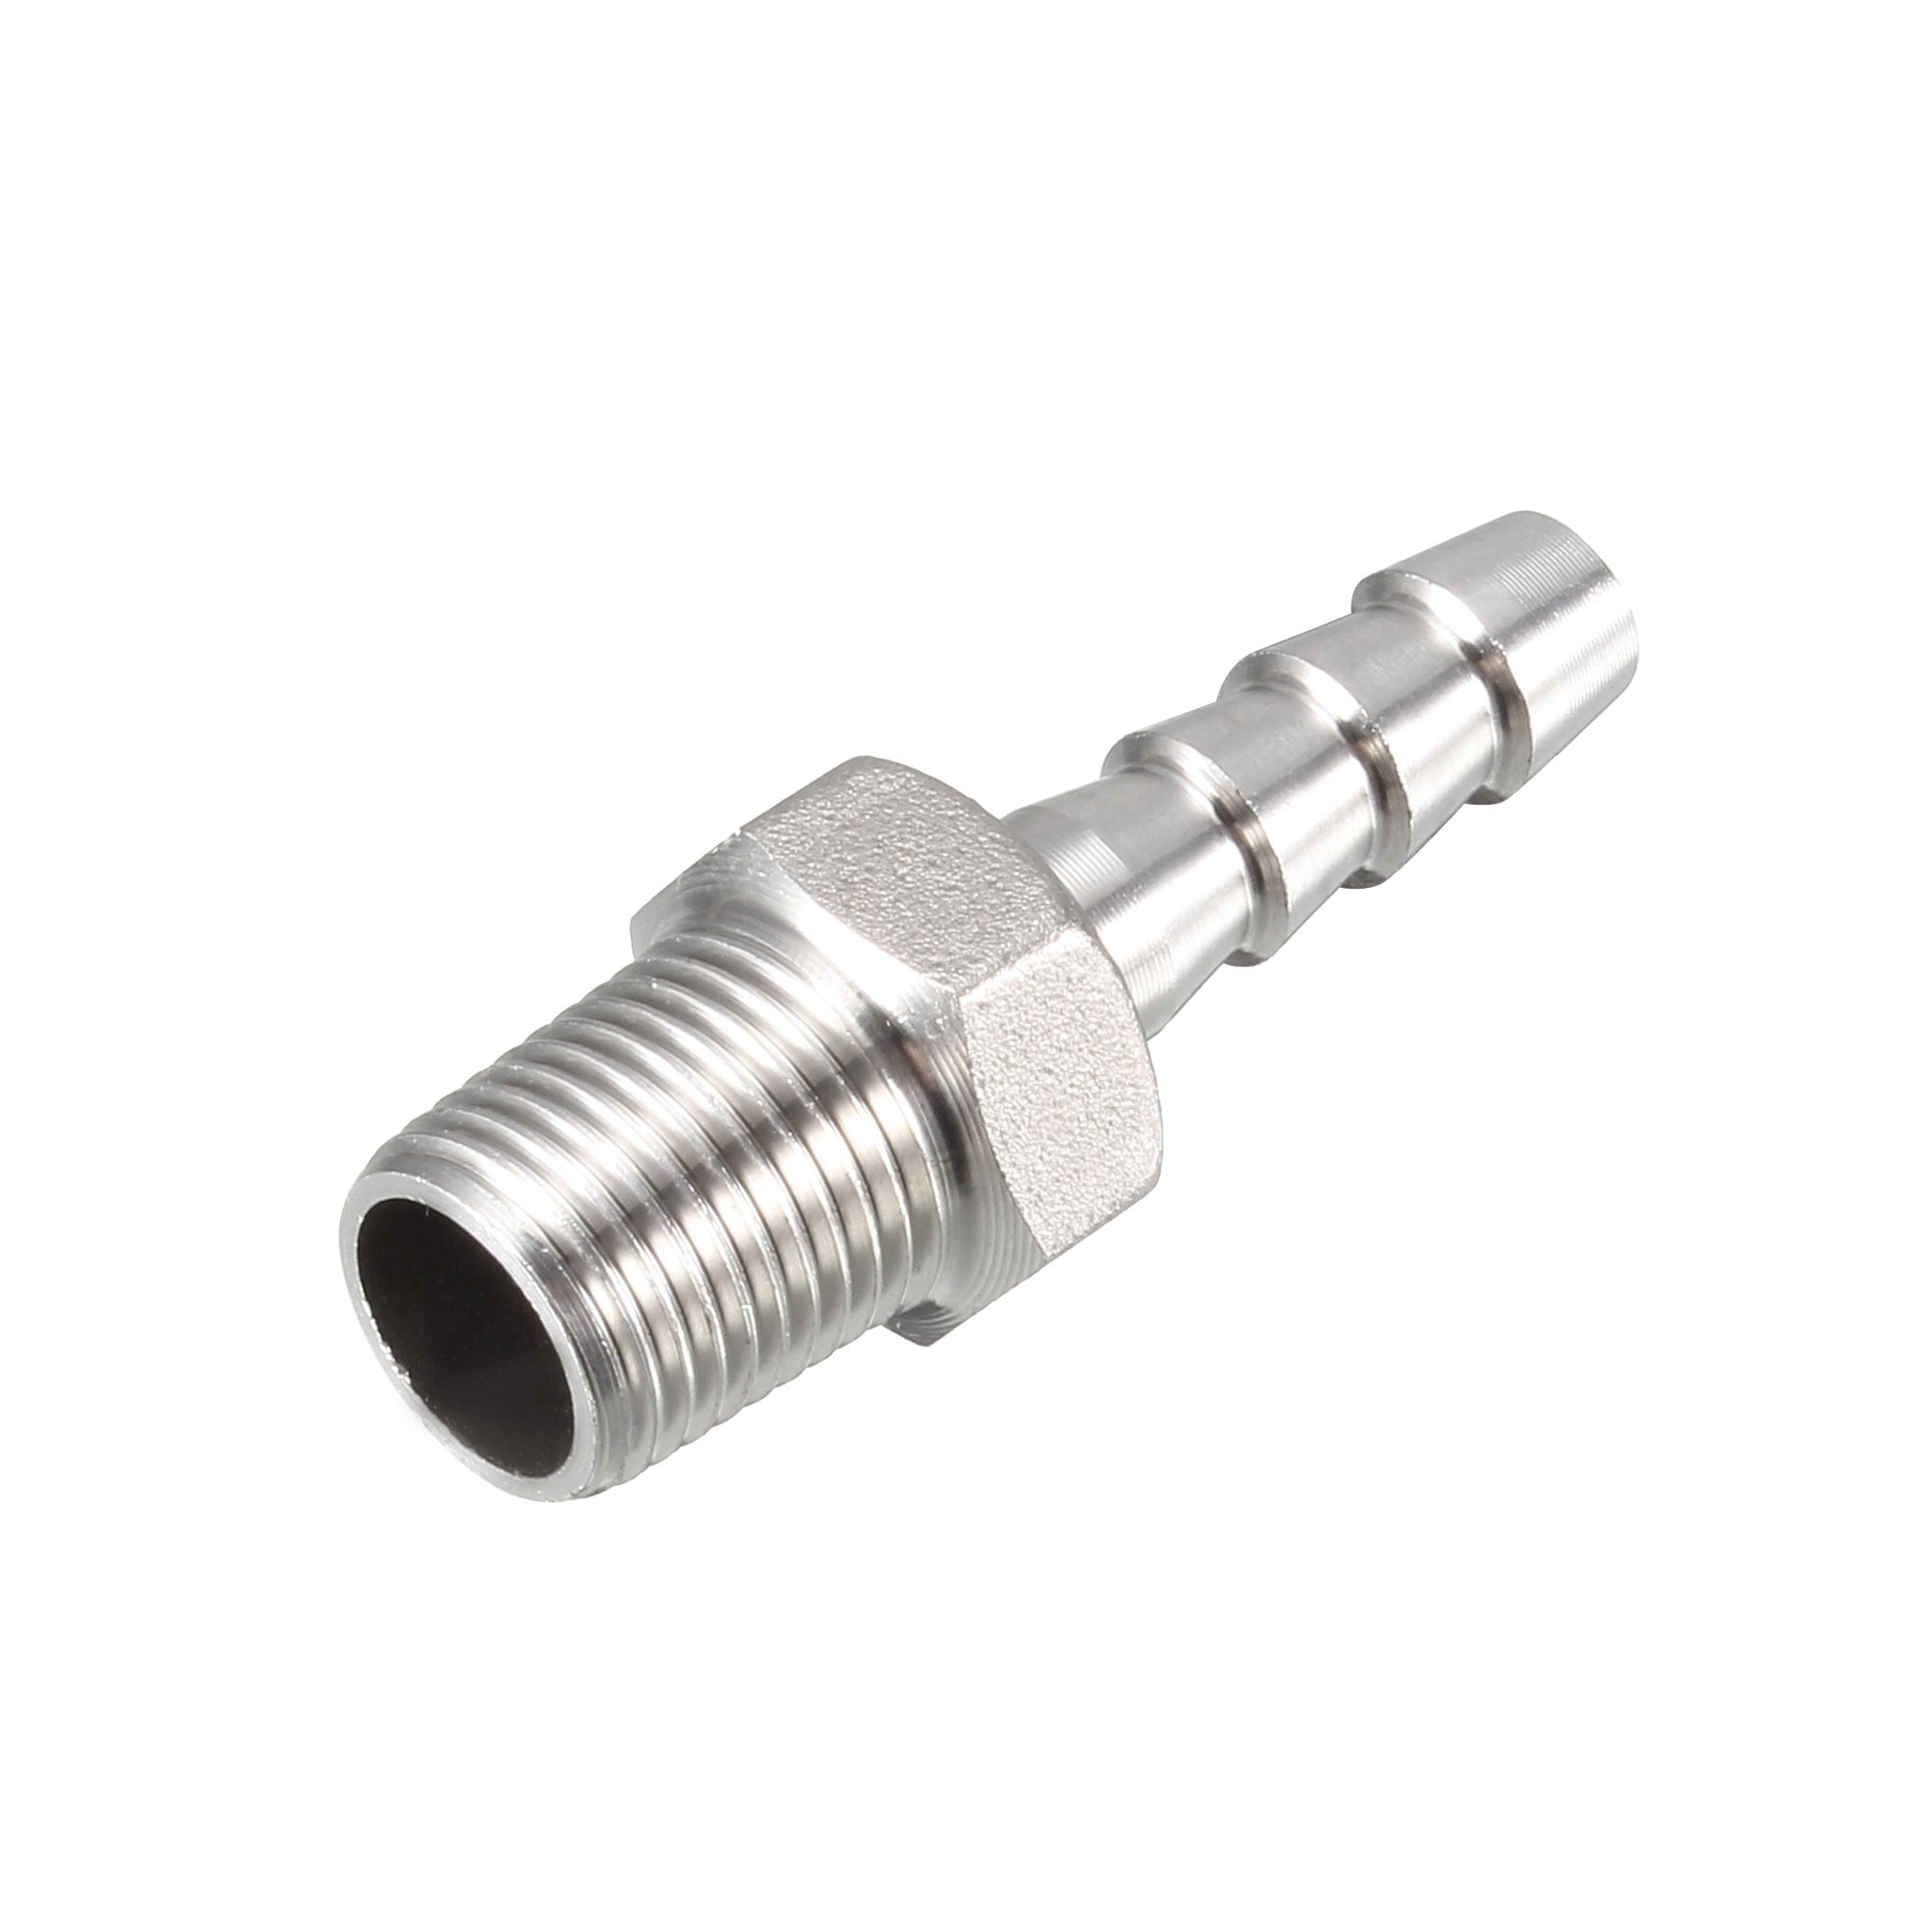 Stainless Steel Barb Hose Connector Adapter 6mm Barbed x G1/2 Female Pipe 2Pcs 